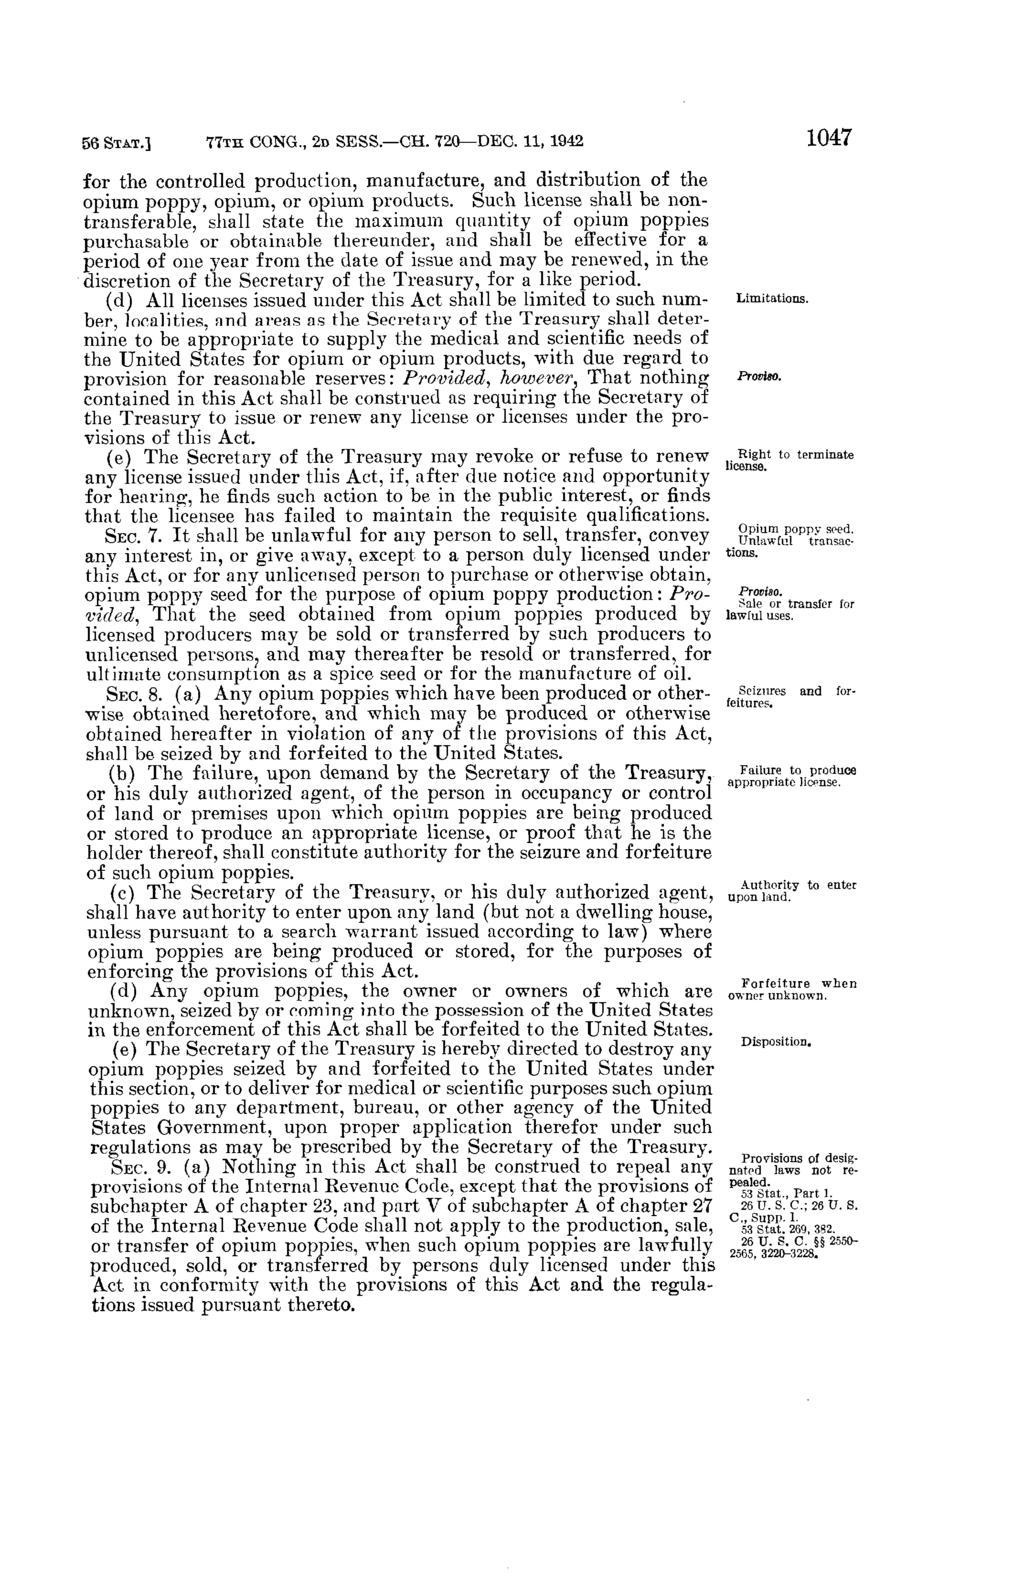 56 STAT] 77TH CONG, 2n SESS-CH 720-DEC 11, 1942 1047 for the controlled production, manufacture, and distribution of the opium poppy, opium, or opium products Such license shall be nontransferable,